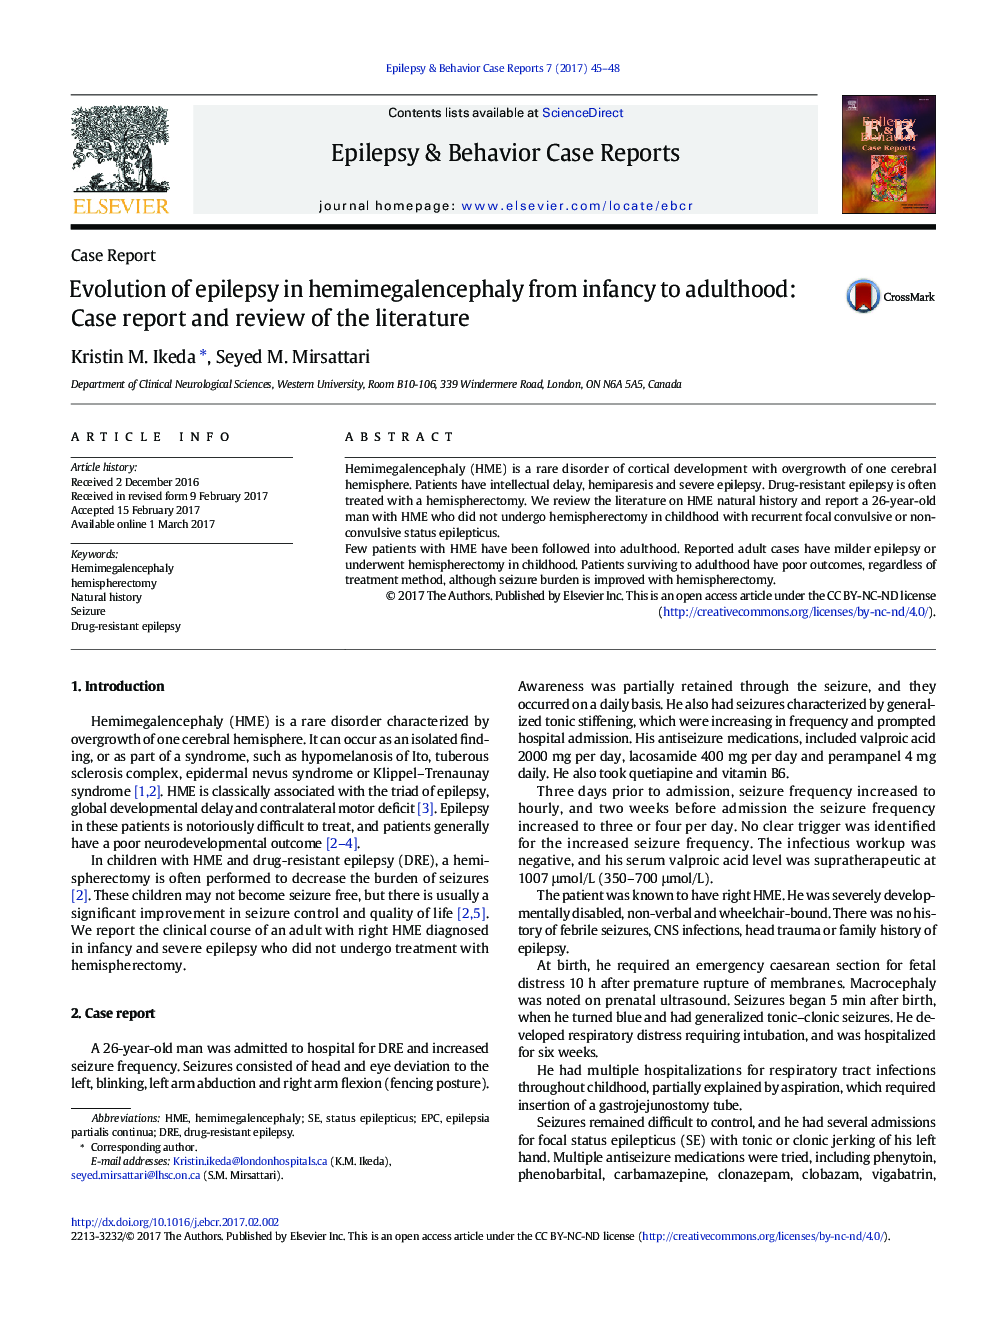 Case ReportEvolution of epilepsy in hemimegalencephaly from infancy to adulthood: Case report and review of the literature